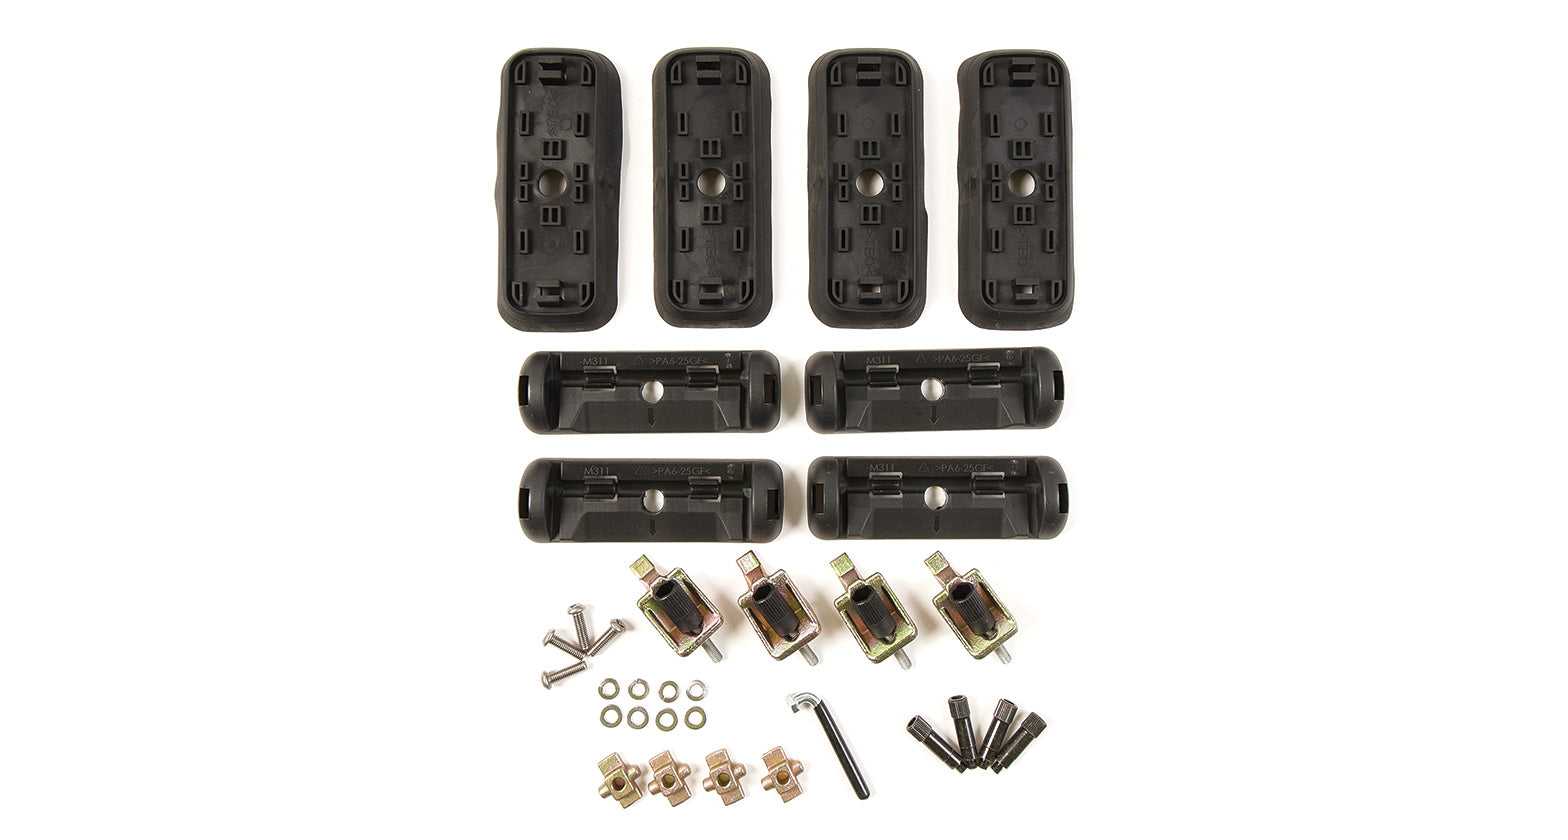 FIXED POINT KIT FOR RHINO 2500 MULTI FIT - DK459